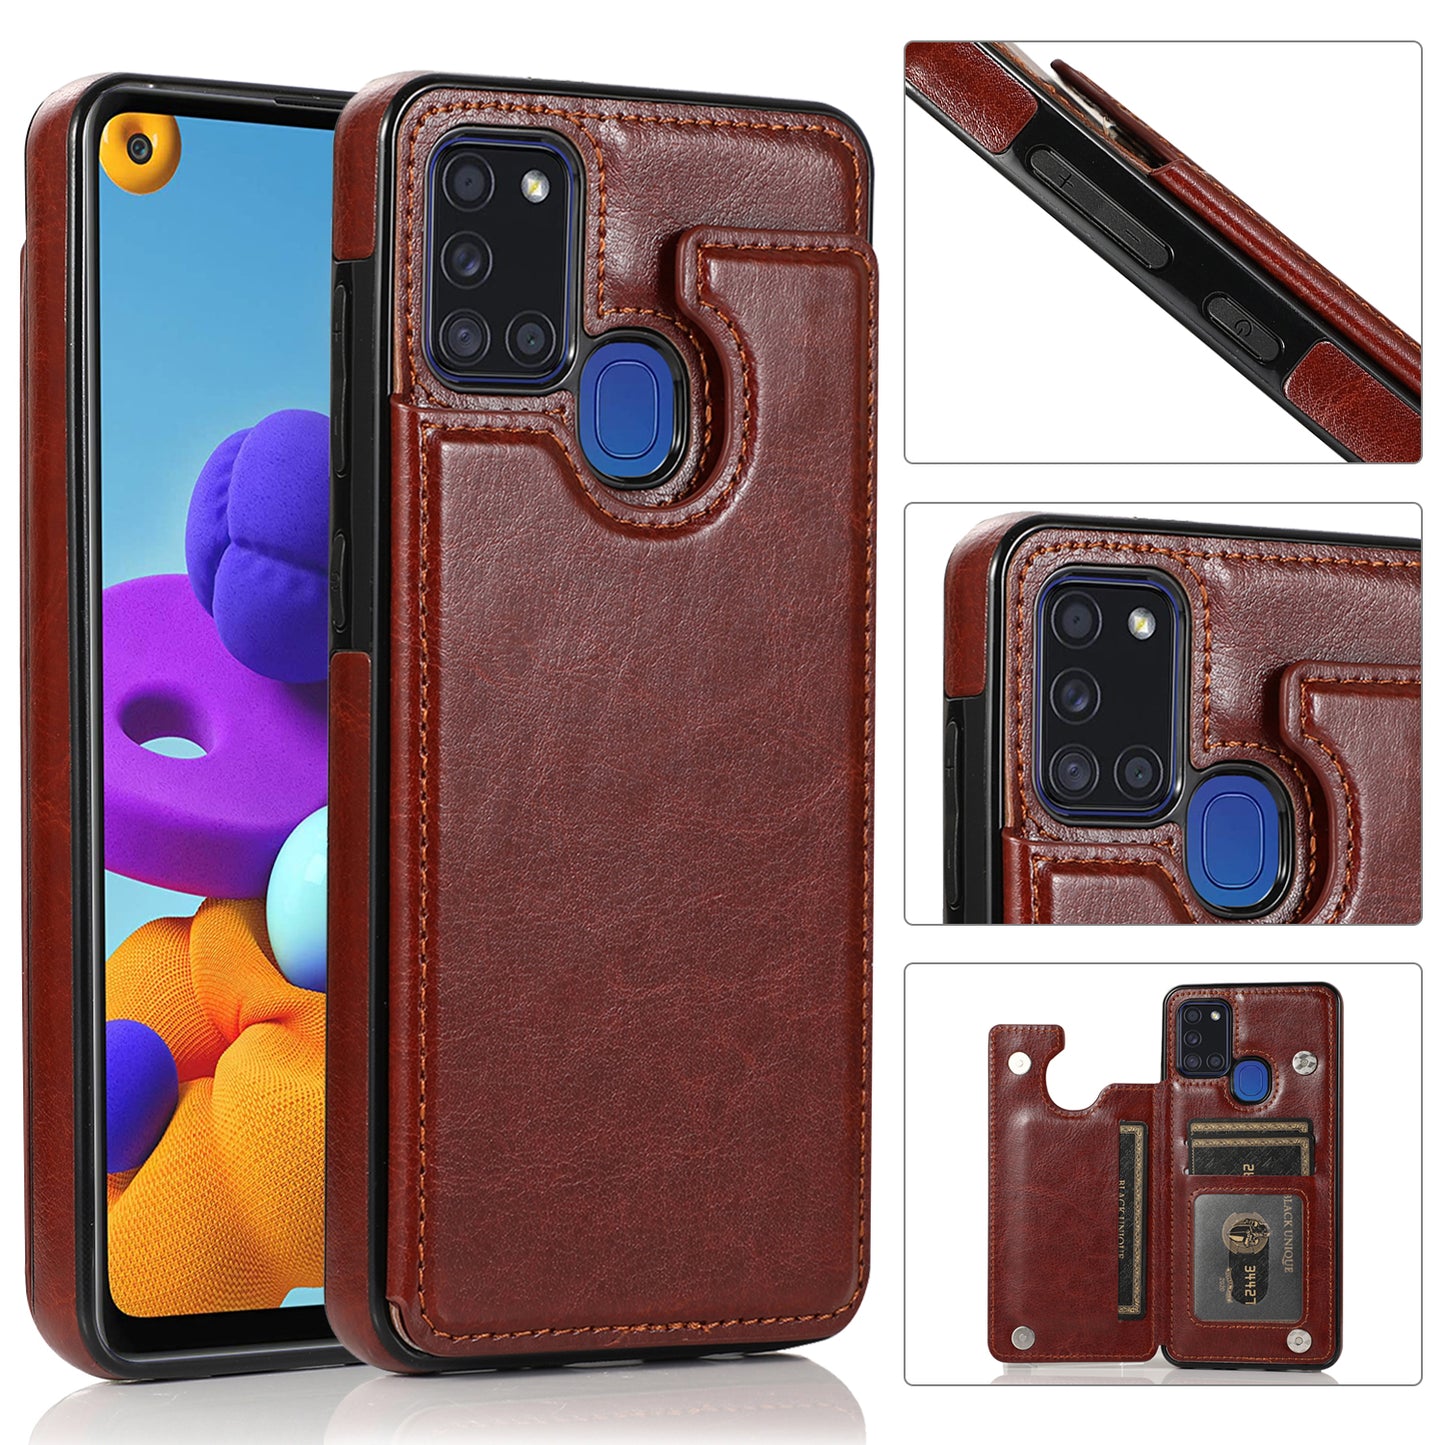 Samsung Galaxy A21s Leather Cover Double Buckles Shock Resistant Multiple Card Slots Magnetic Fold Pocket